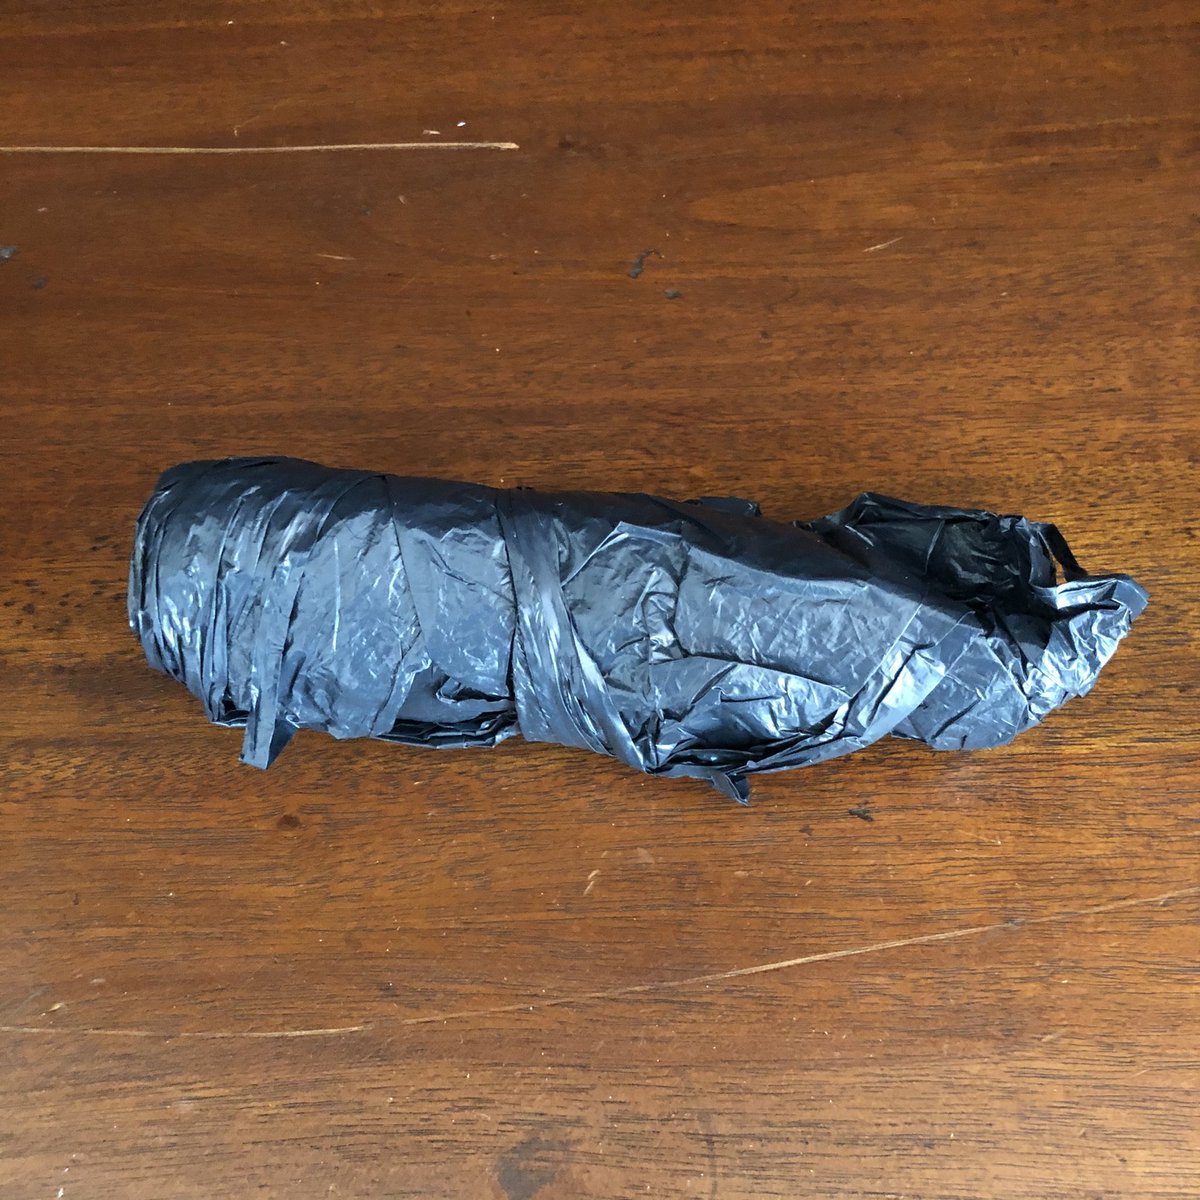 That solution involves two grocery bags, one for each side. These are the slightly heavier, black bags used at Virginia ABC stores for liquor purchases. They are rolled up as they live normally inside the rolled-up rain cover.